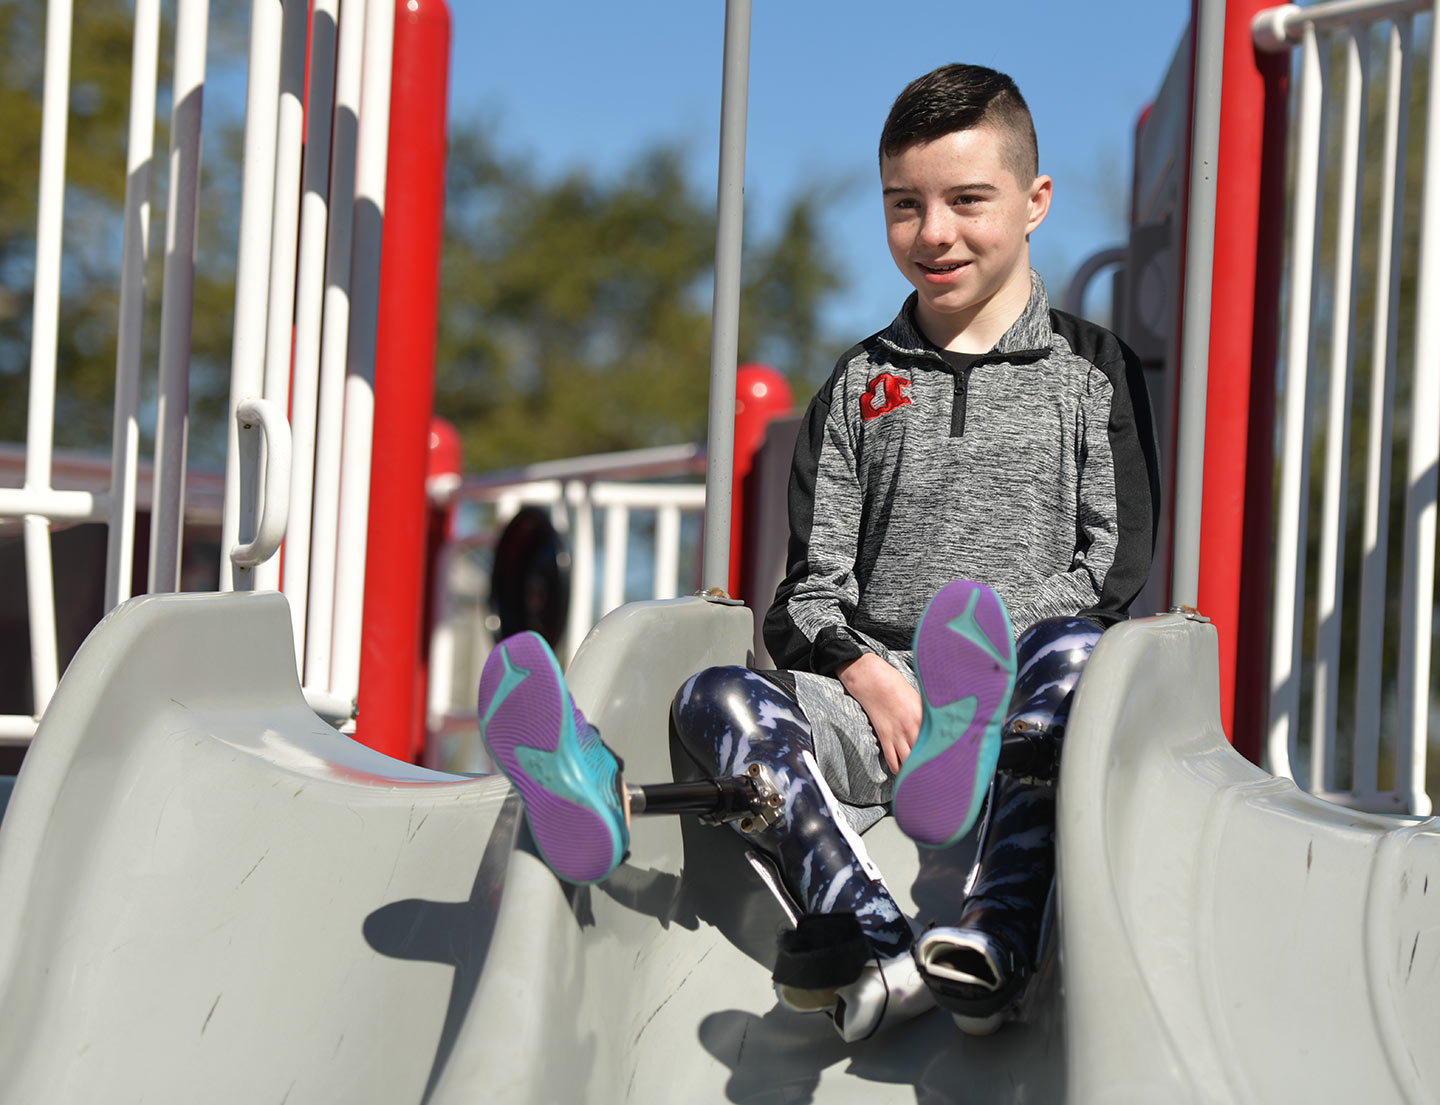 male patient with prosthetic leg on playground